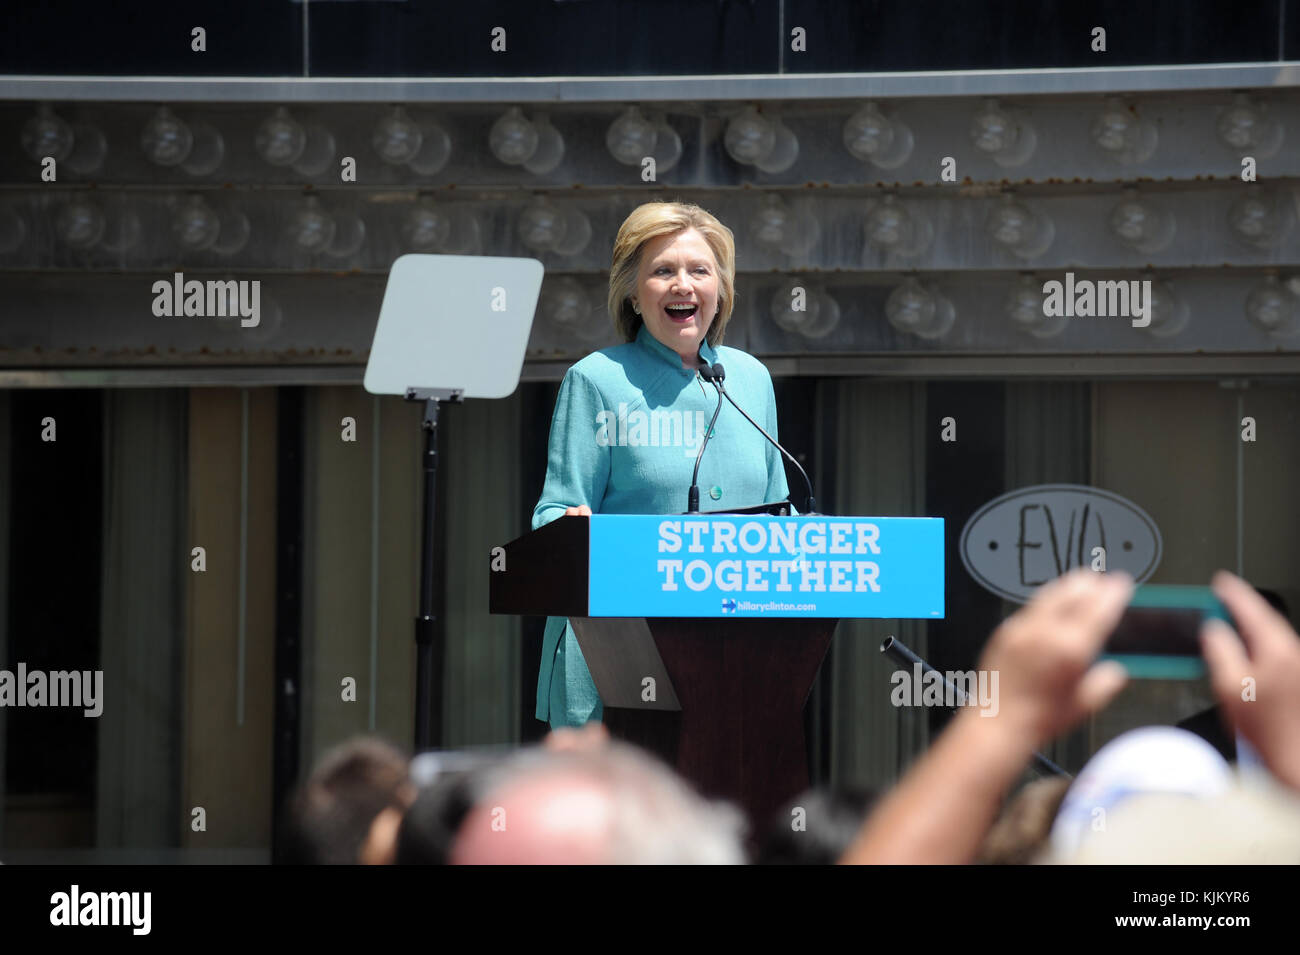 ATLANTIC CITY, NJ - JULY 06: Presumptive Democratic presidential nominee Hillary Clinton speaks at the podium at Boardwalk Hall Arena on July 6, 2016 in Atlantic City, New Jersey   People:  Hillary Clinton Stock Photo